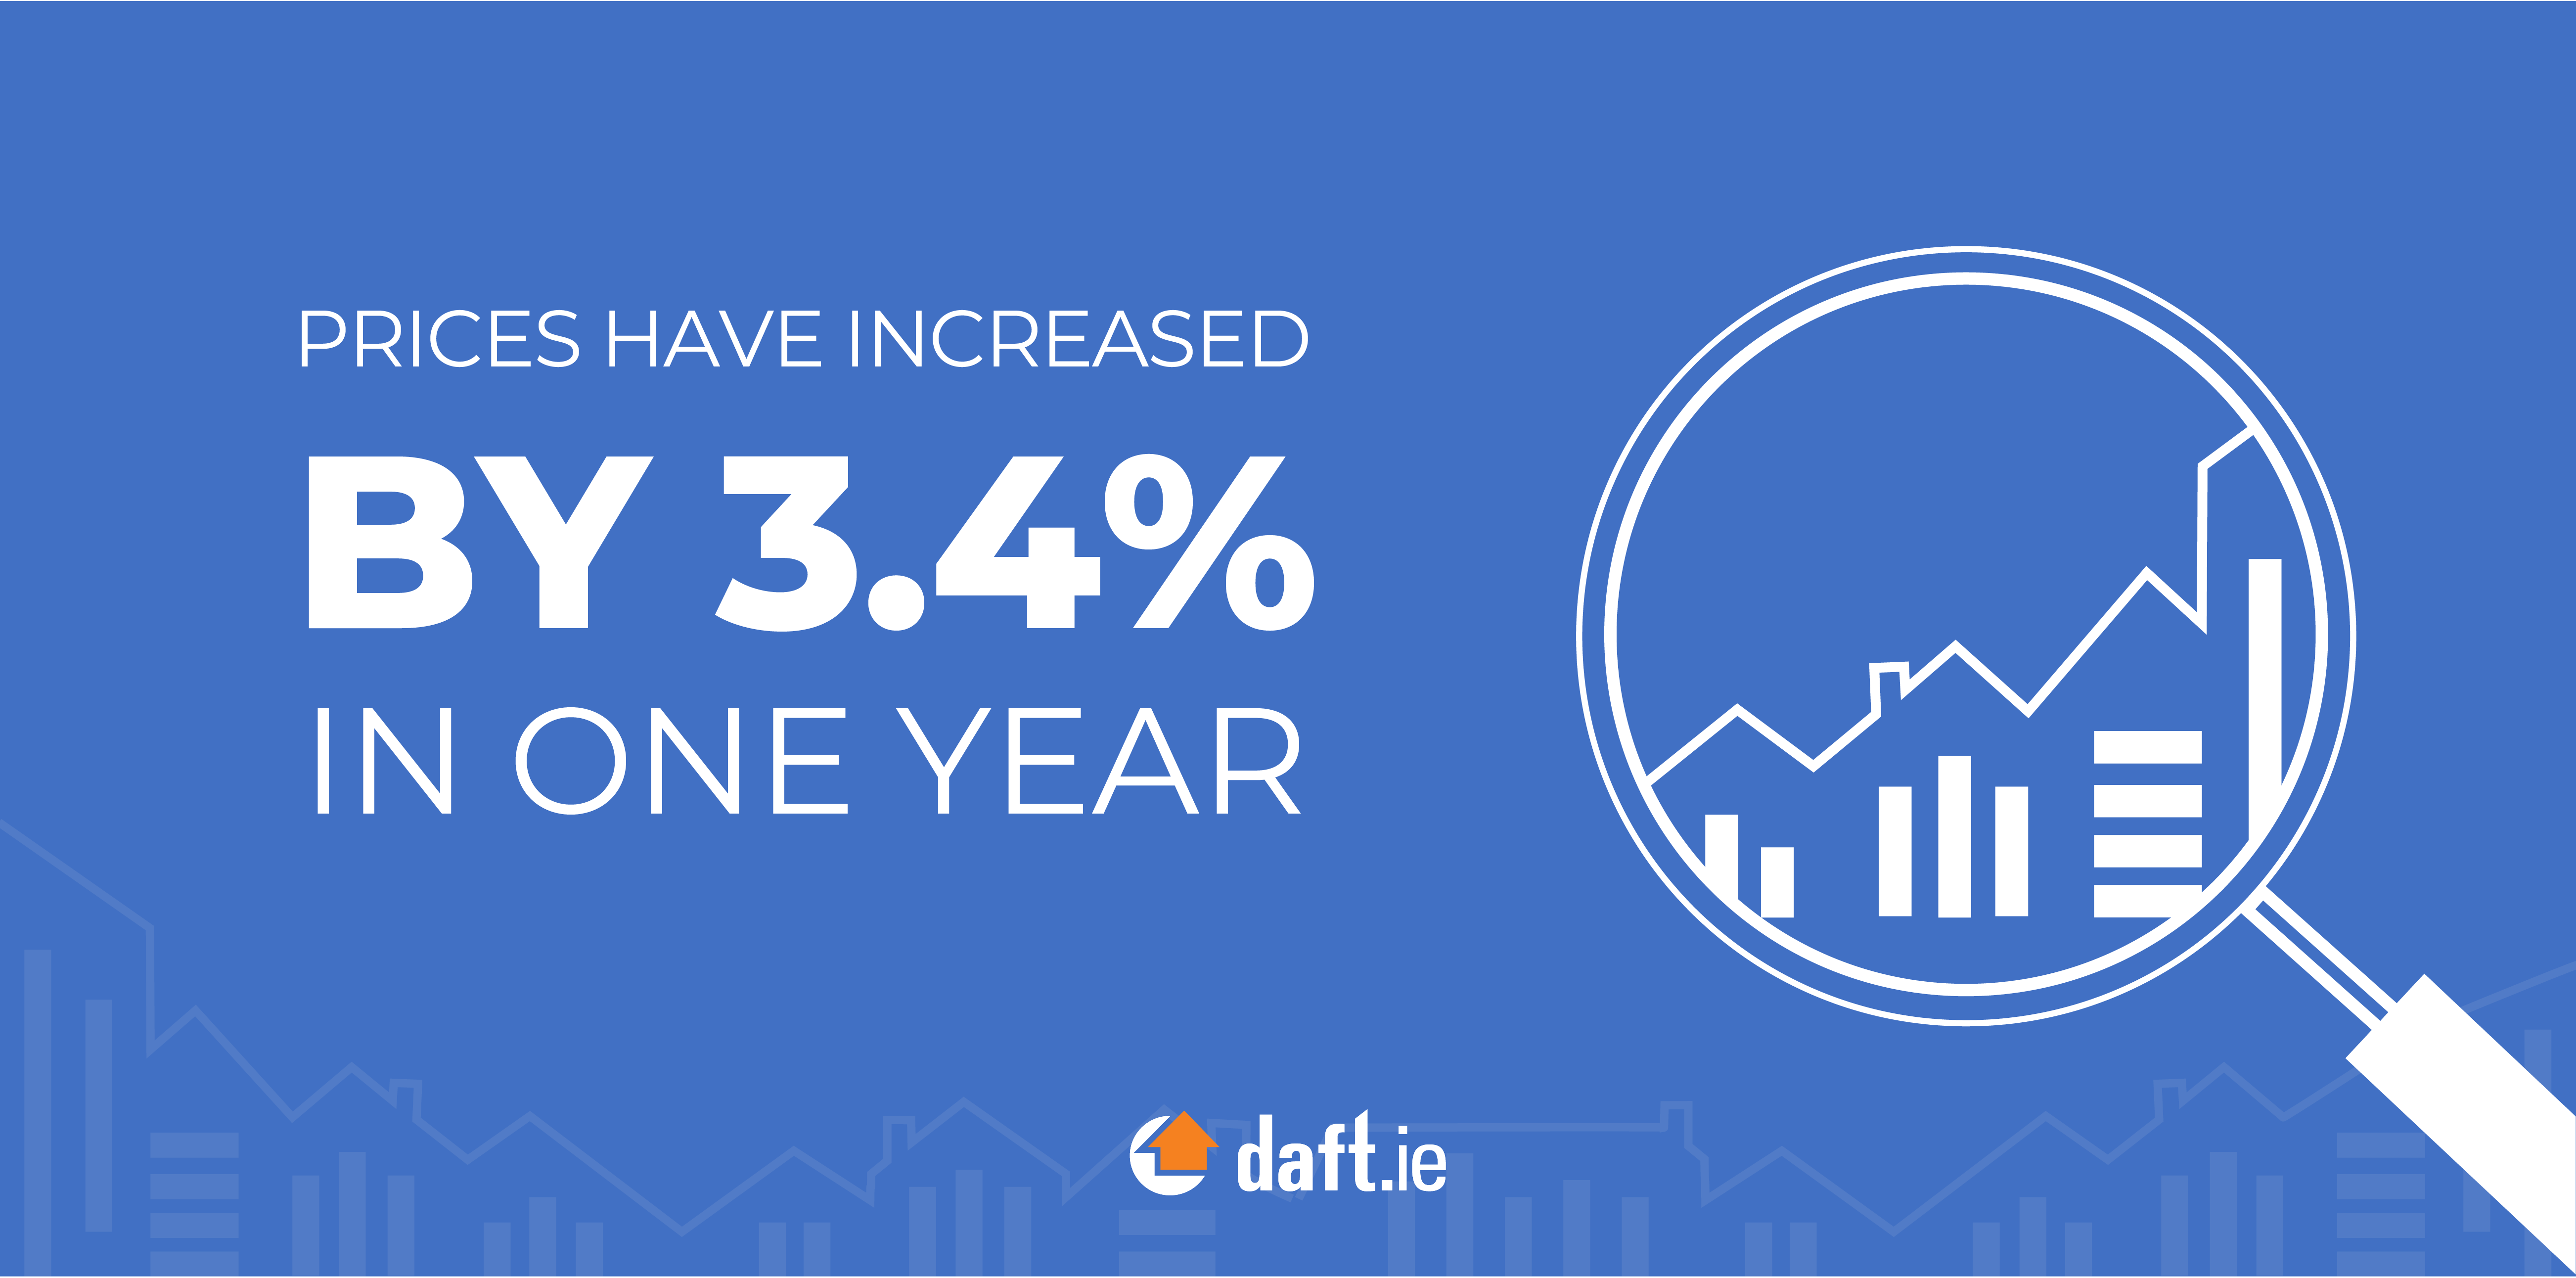 Prices Have Increased By 3.4% In One Year